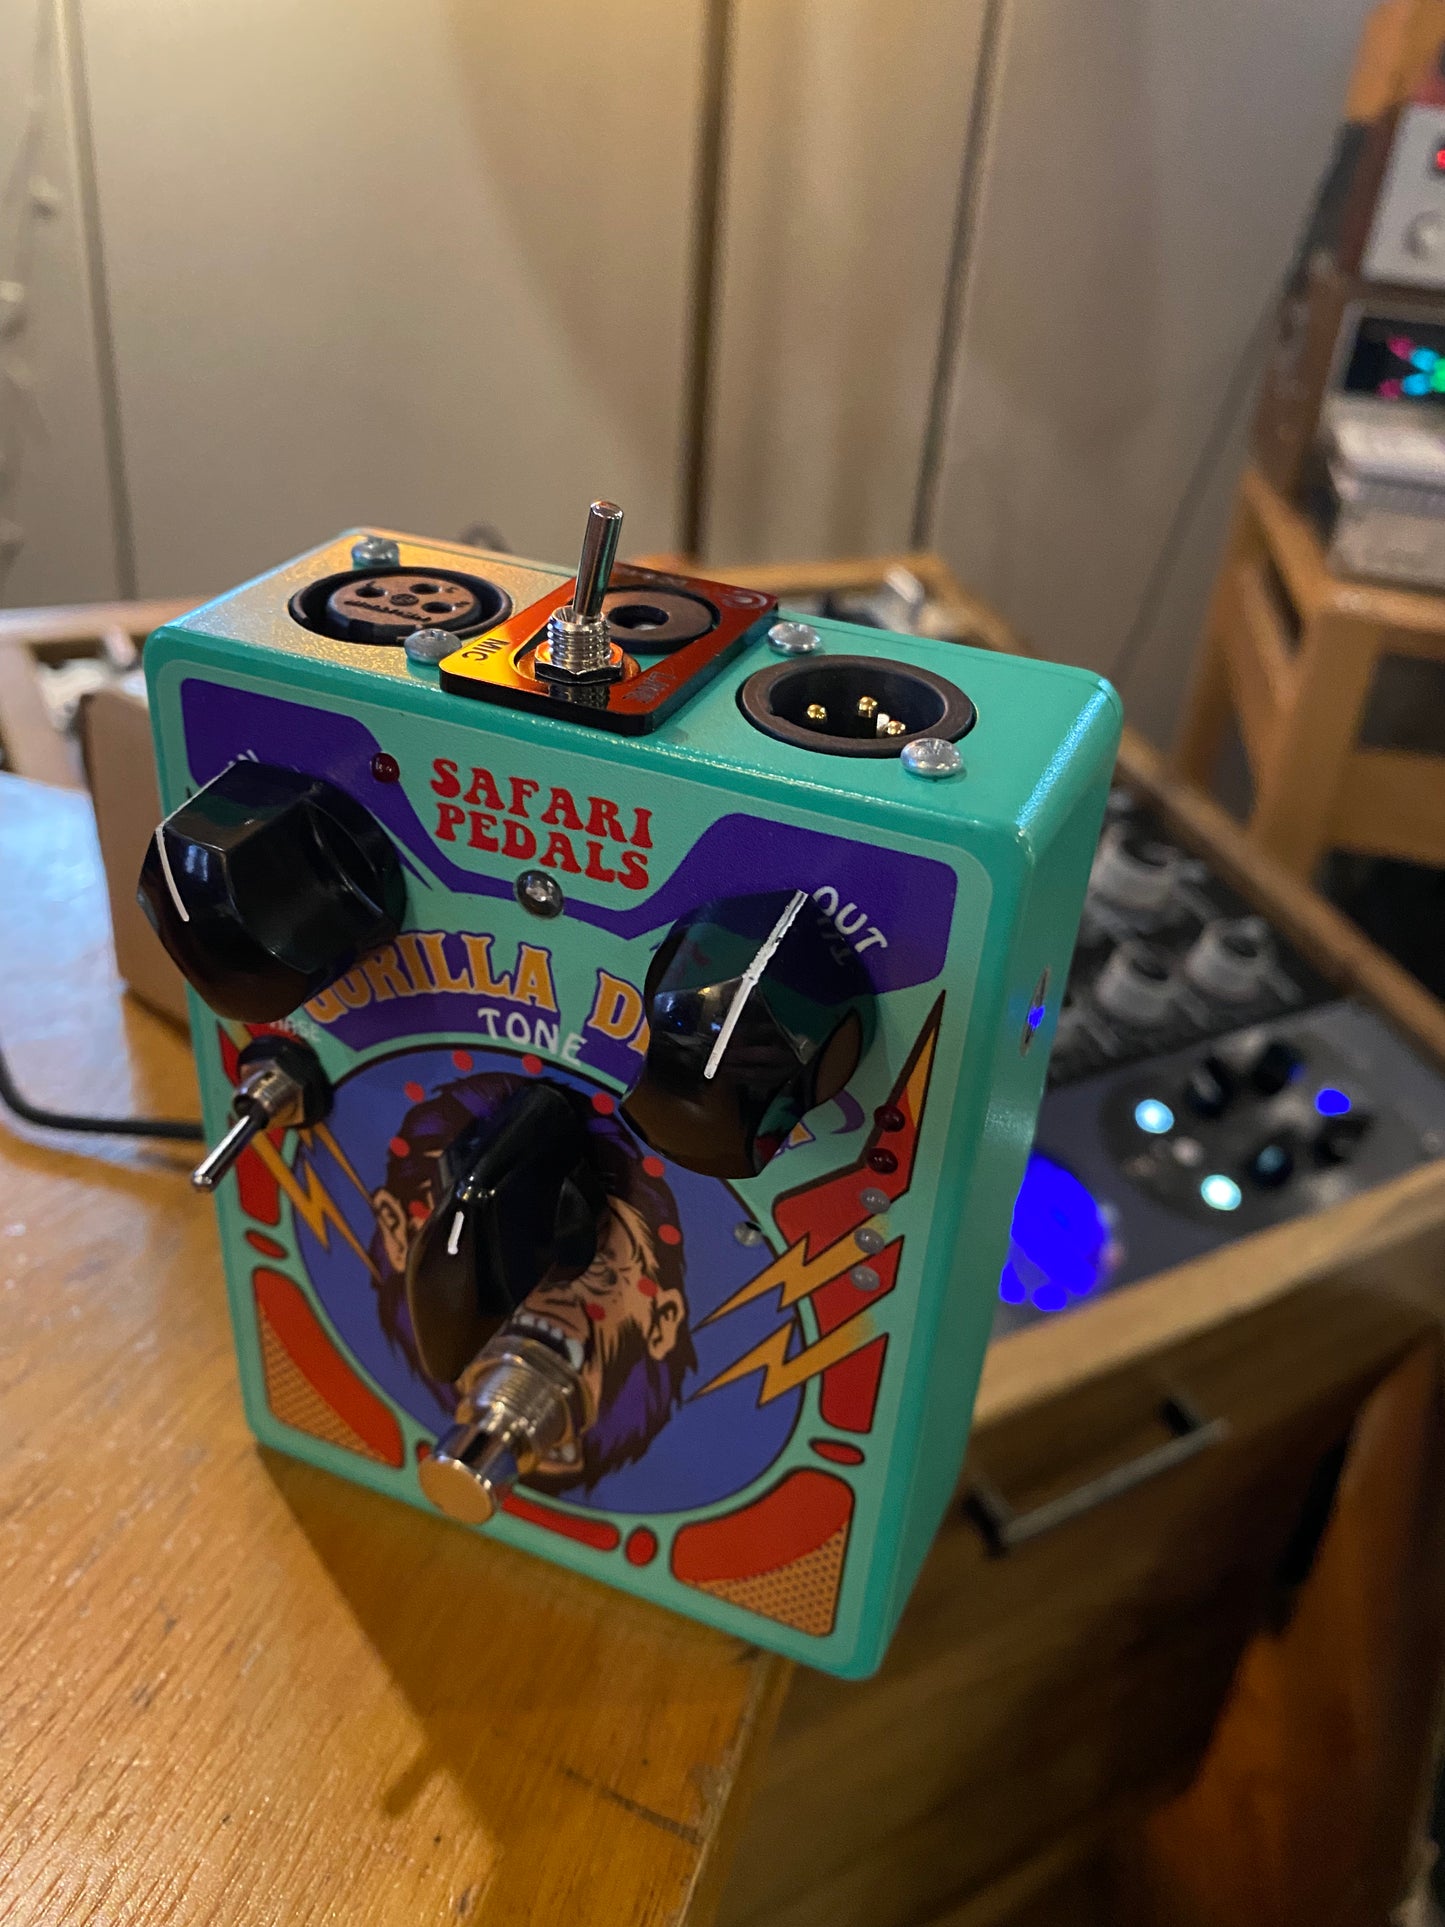 Gorilla Drive - Mic preamp and overdrive pedal with tone